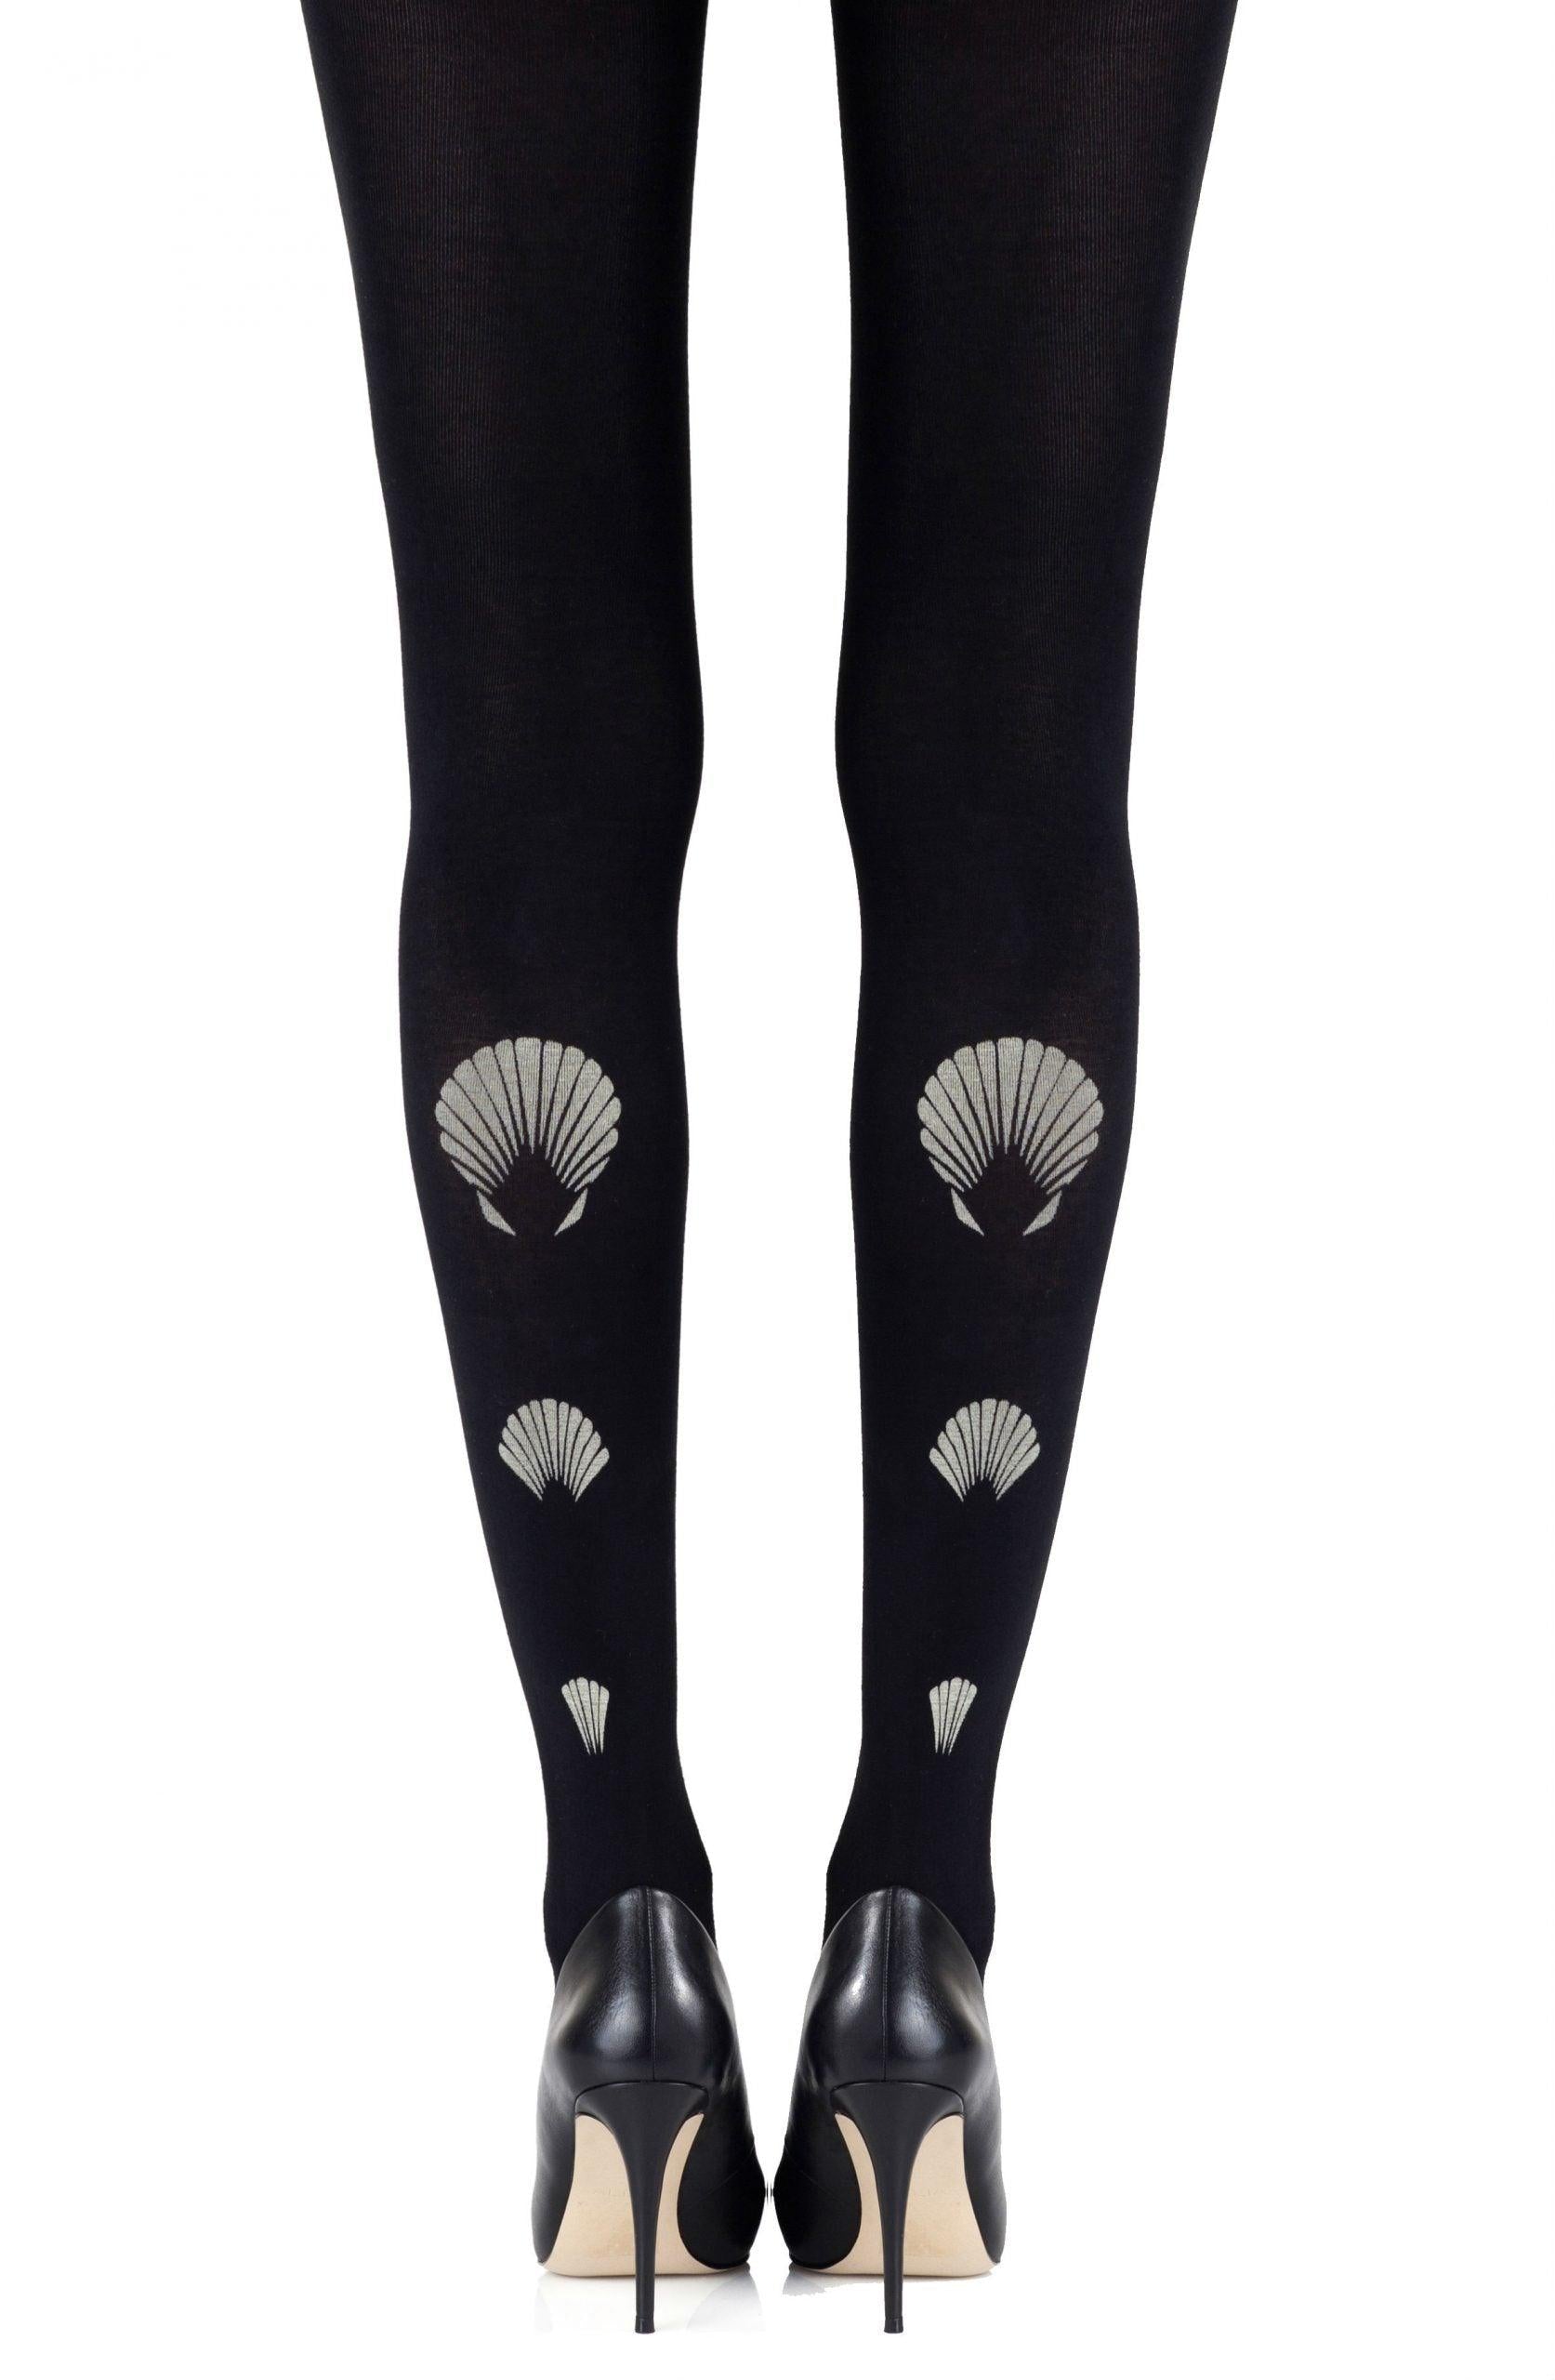 Zohara "What The Shell" Black Tights - Sydney Rose Lingerie 